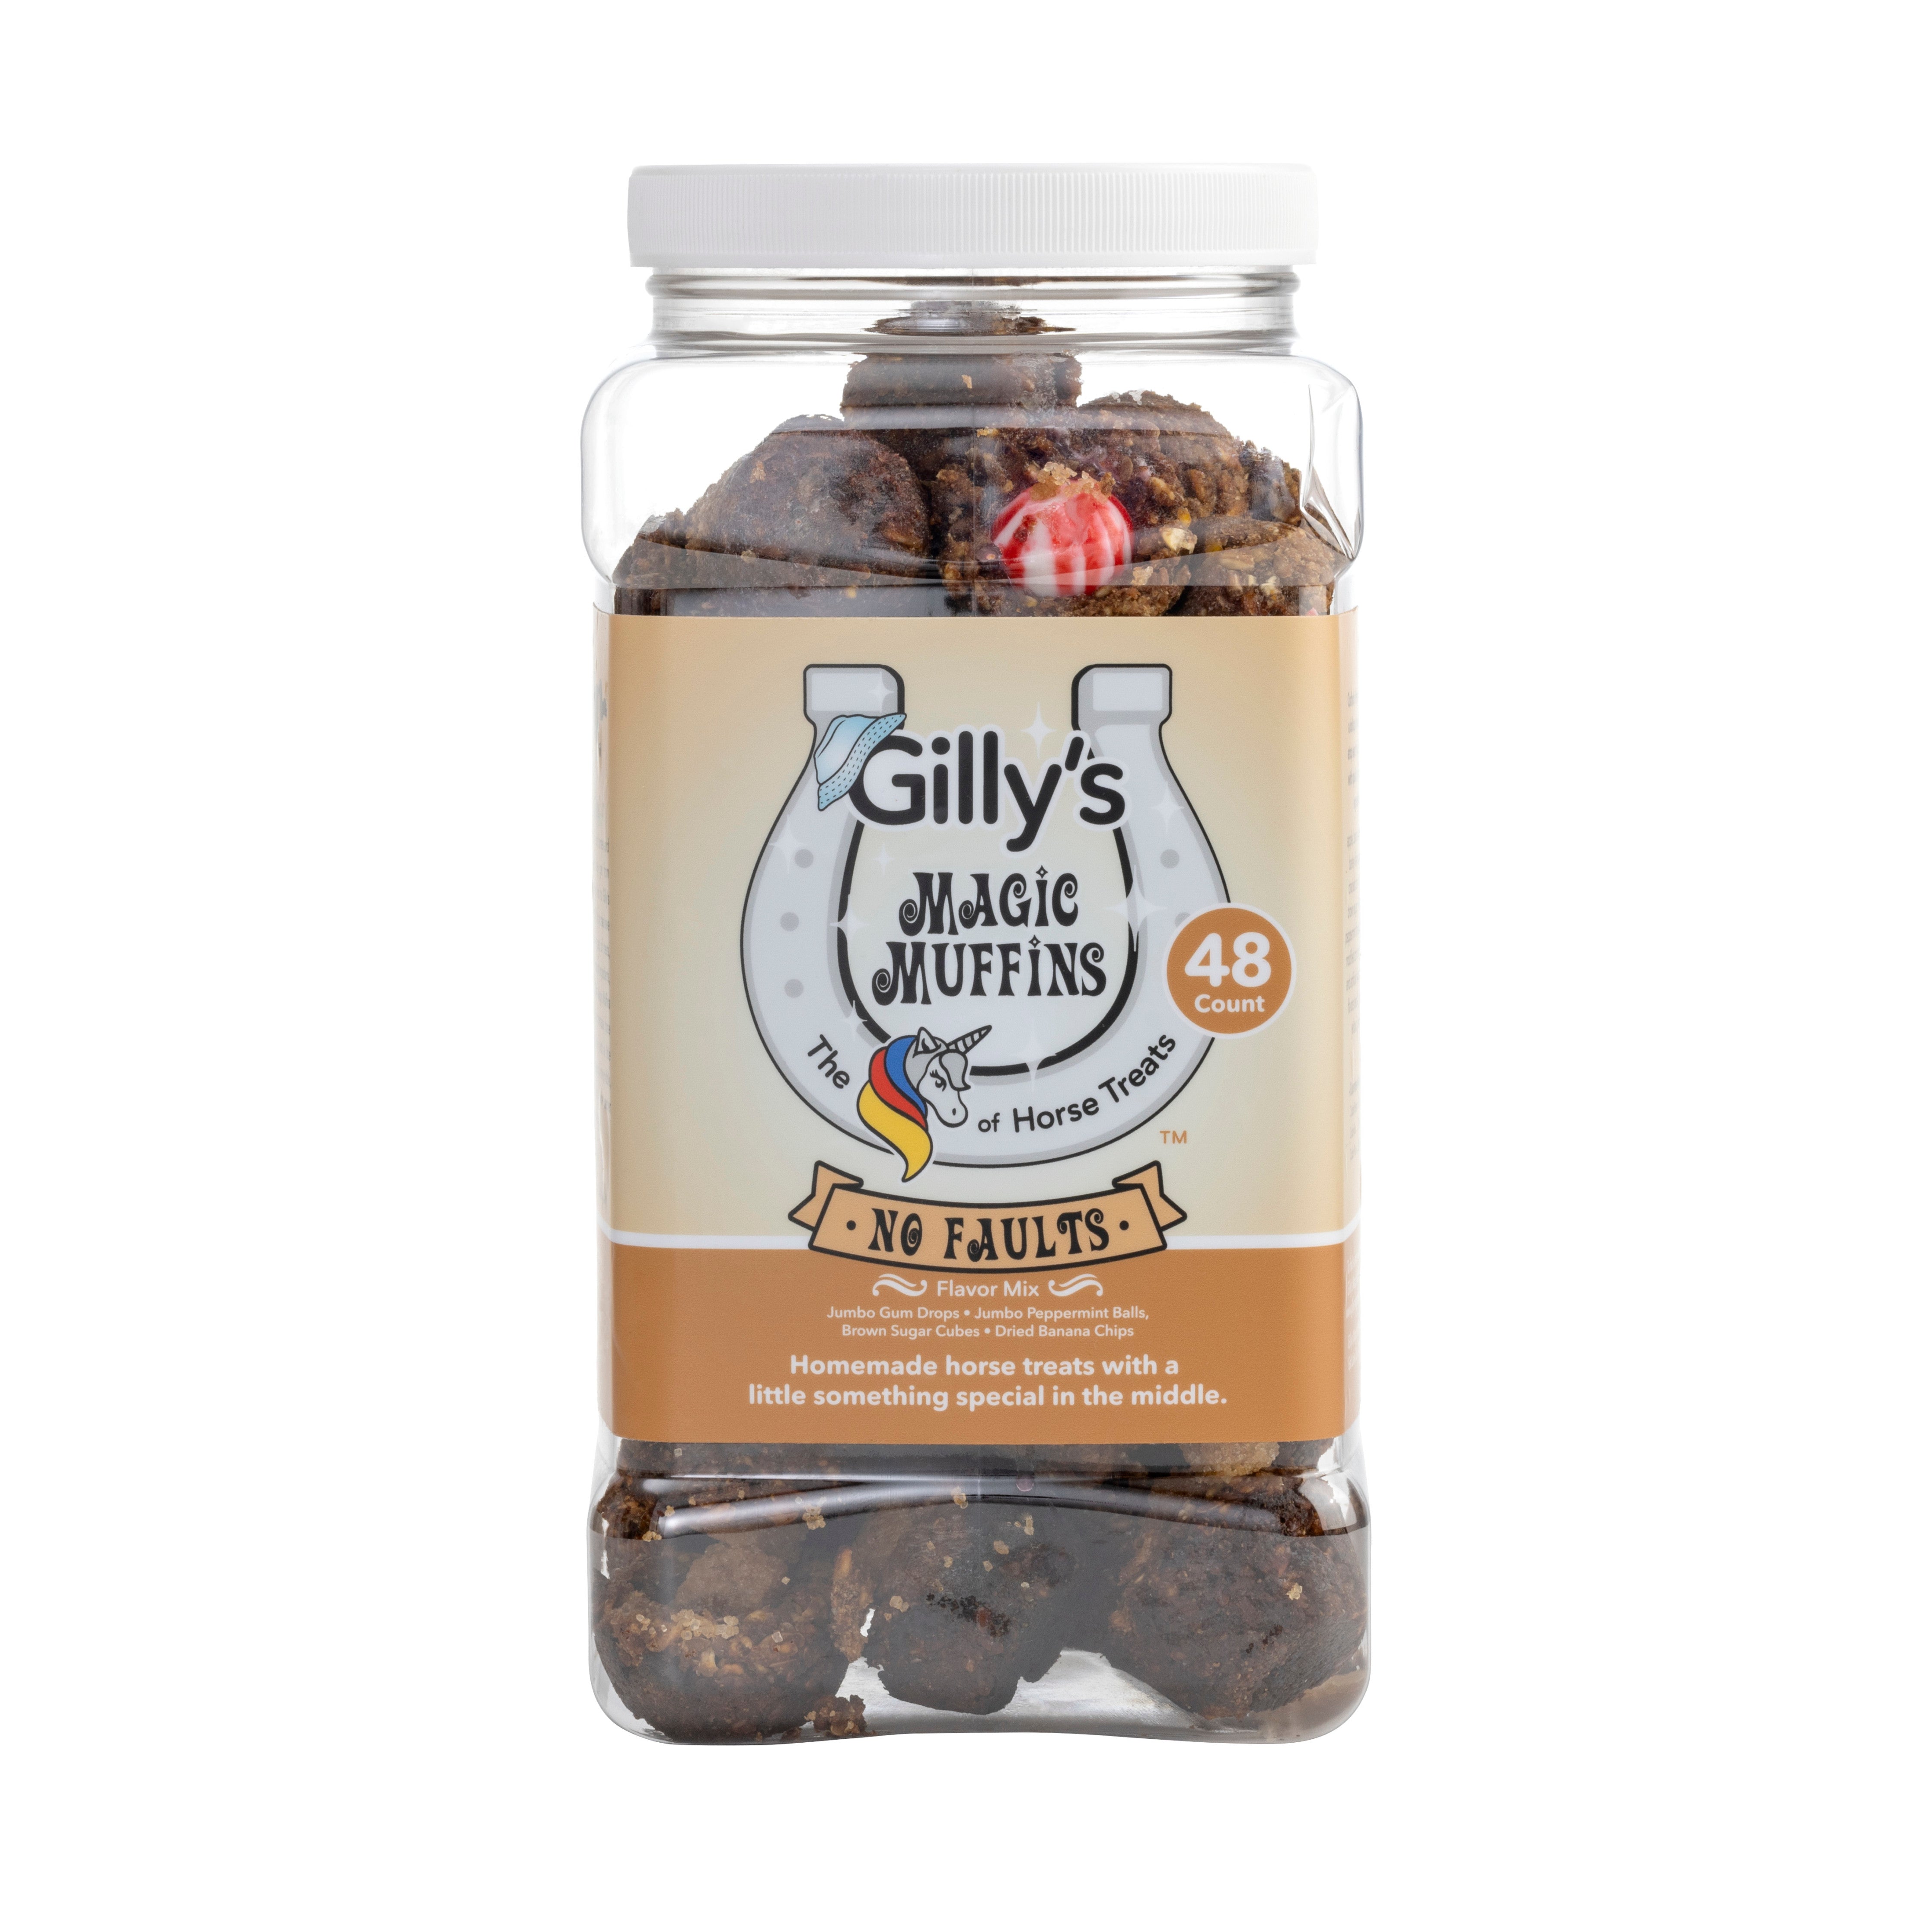 Gilly's Magic Muffins 48-ct jar